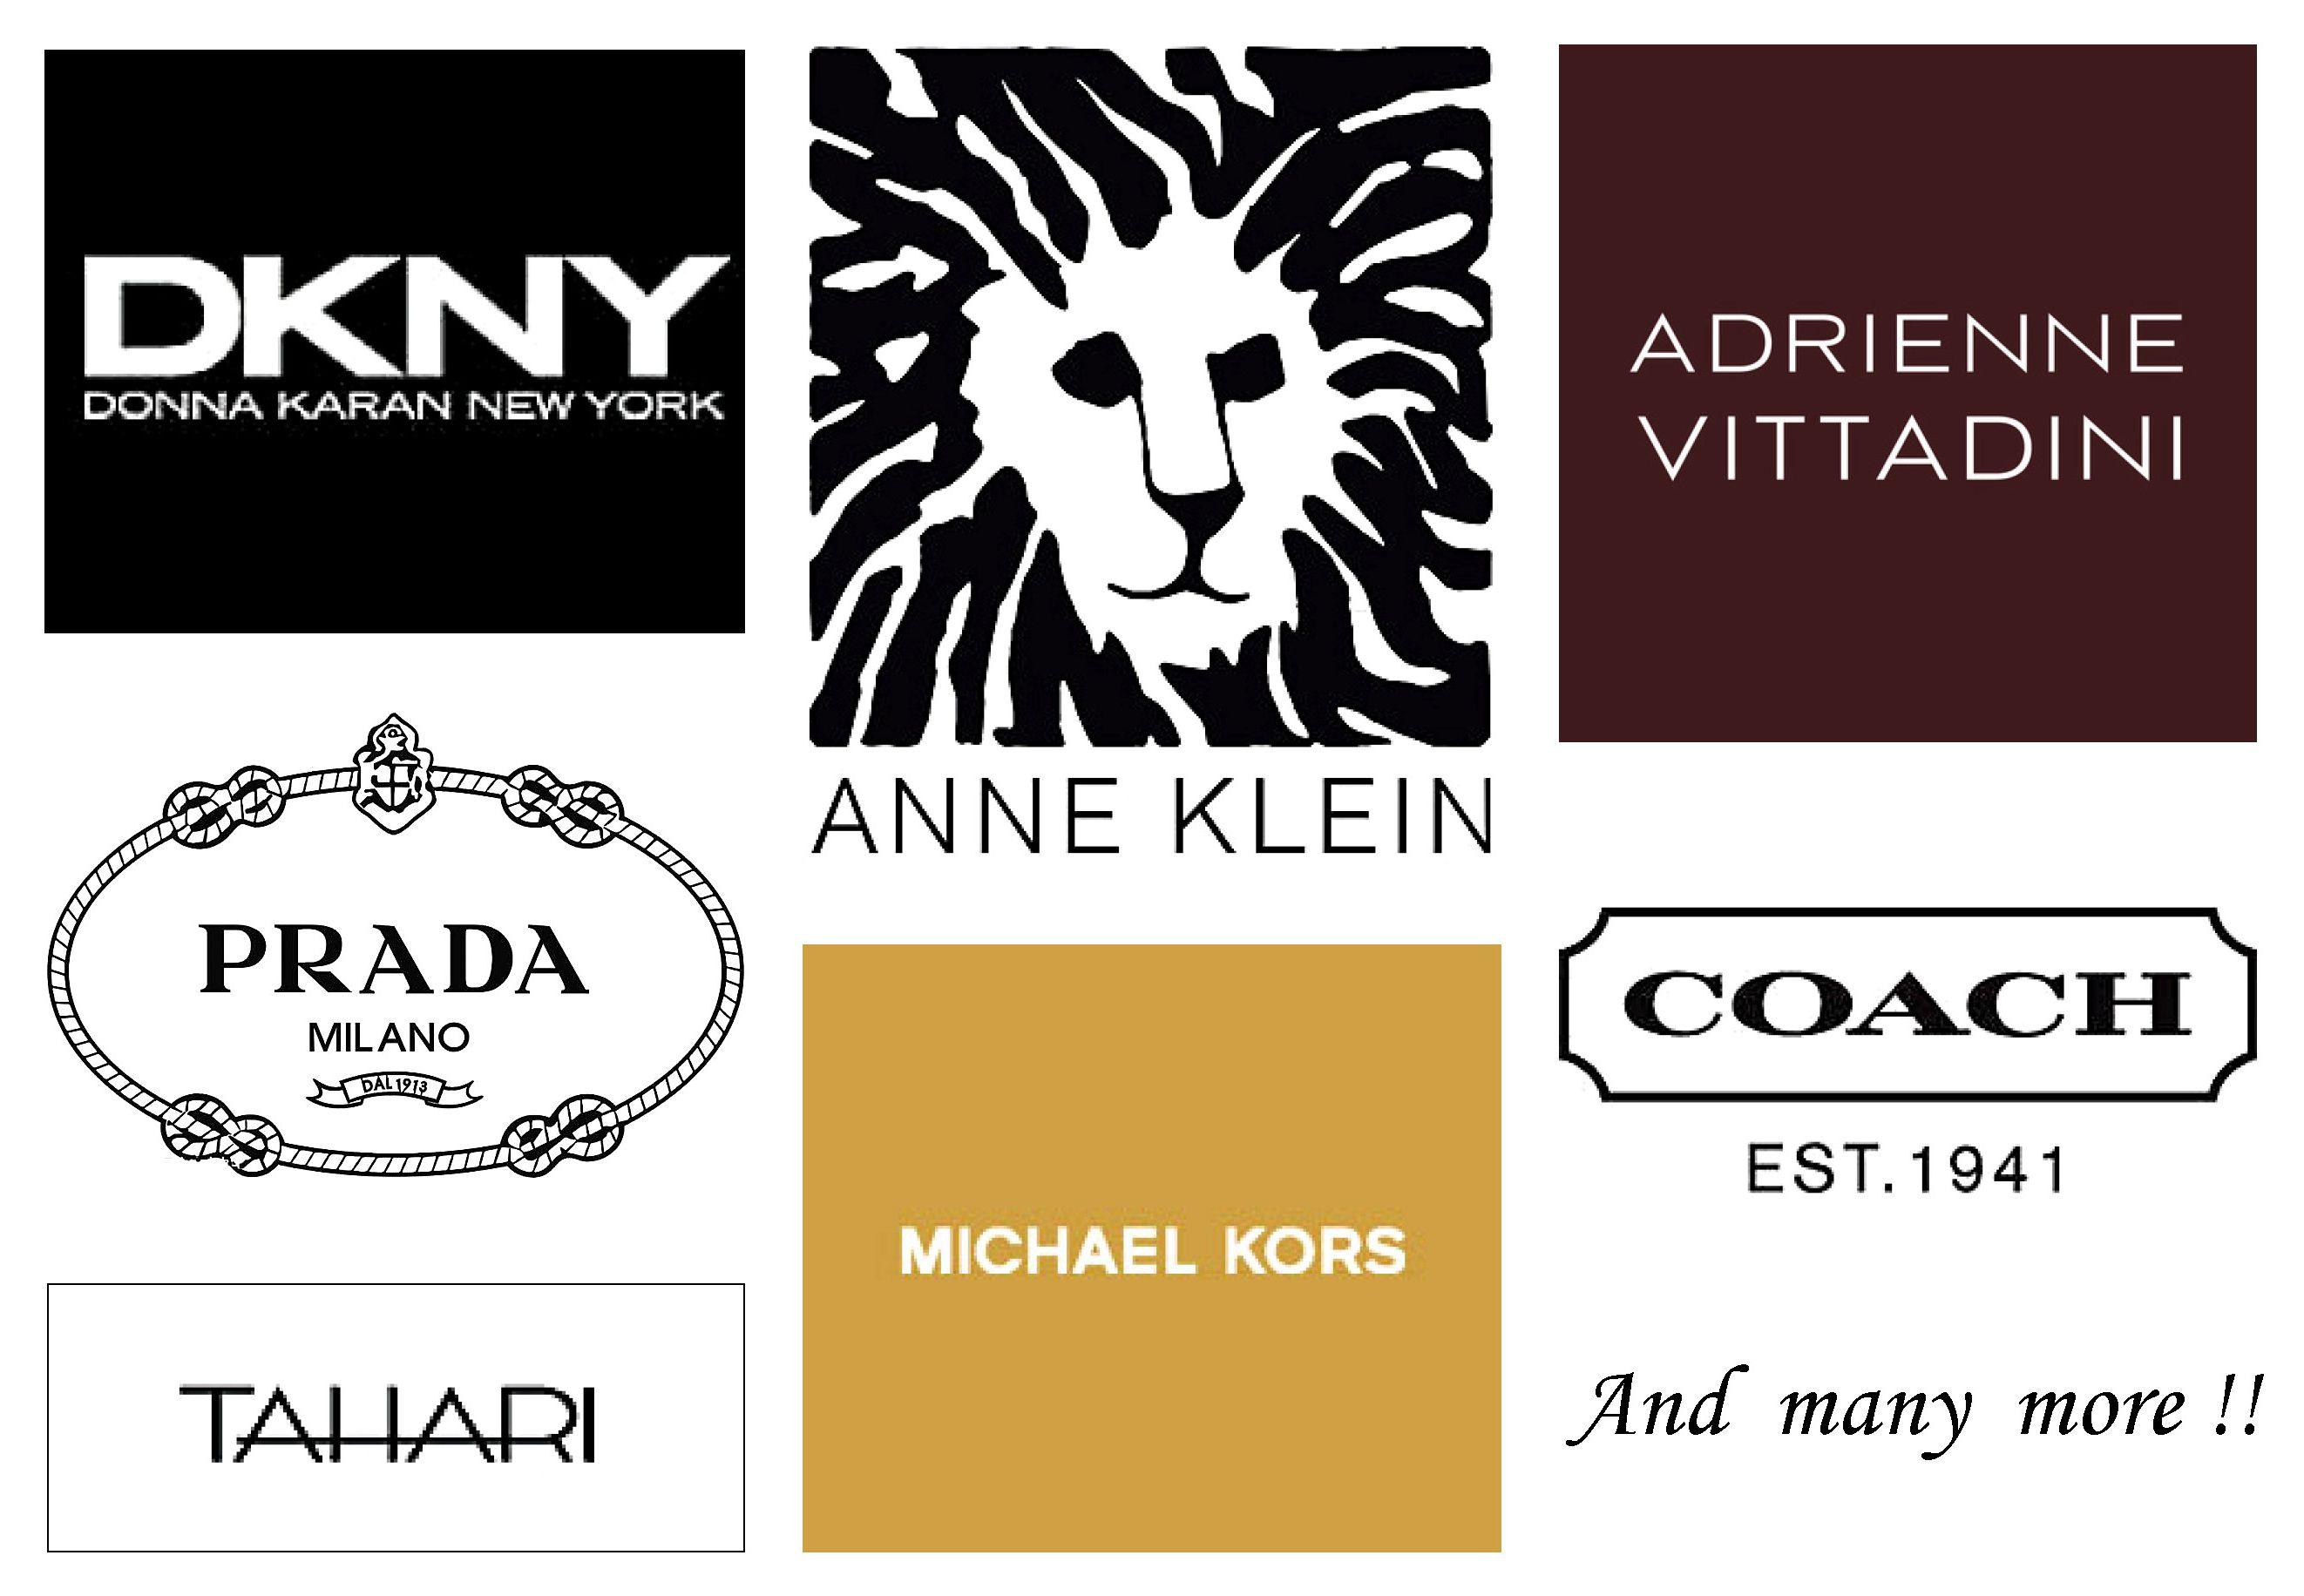 High End Clothing Brand Logo - Margaret's Closet | Afton Village - A New Old Neighborhood in ...